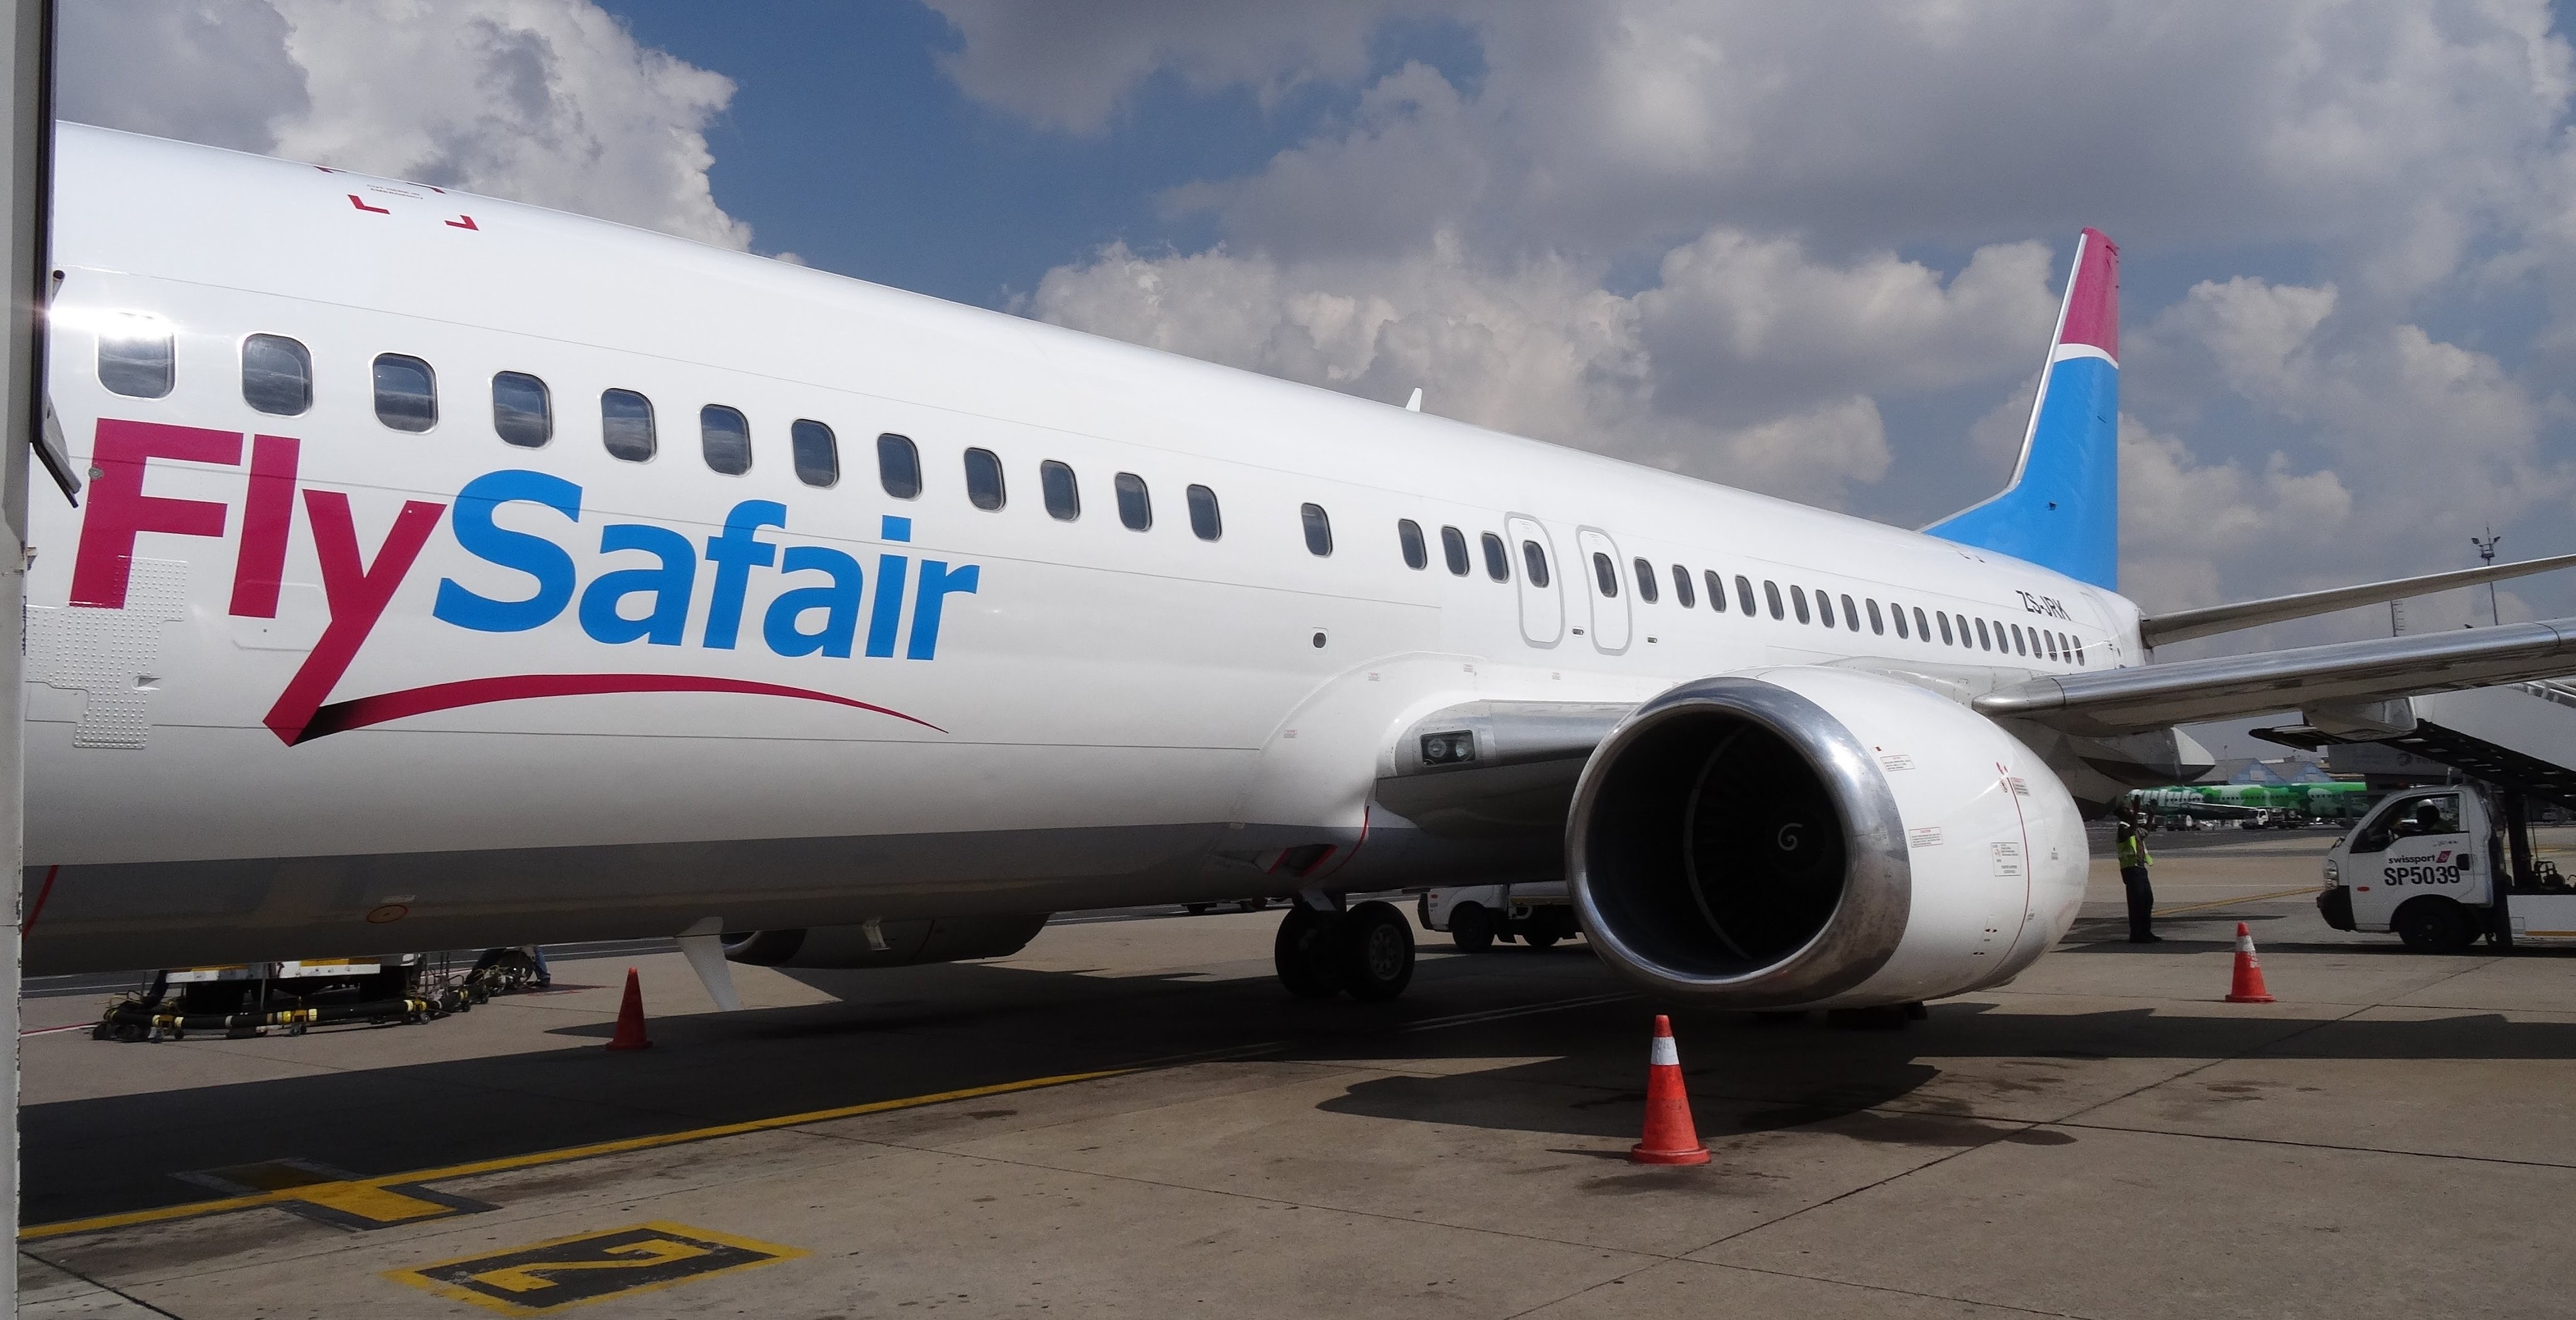 South African  FlySafair  Faces Regulatory  Investigation for Potential  Shareholding  Violations  Amid  Expansion  Plans .